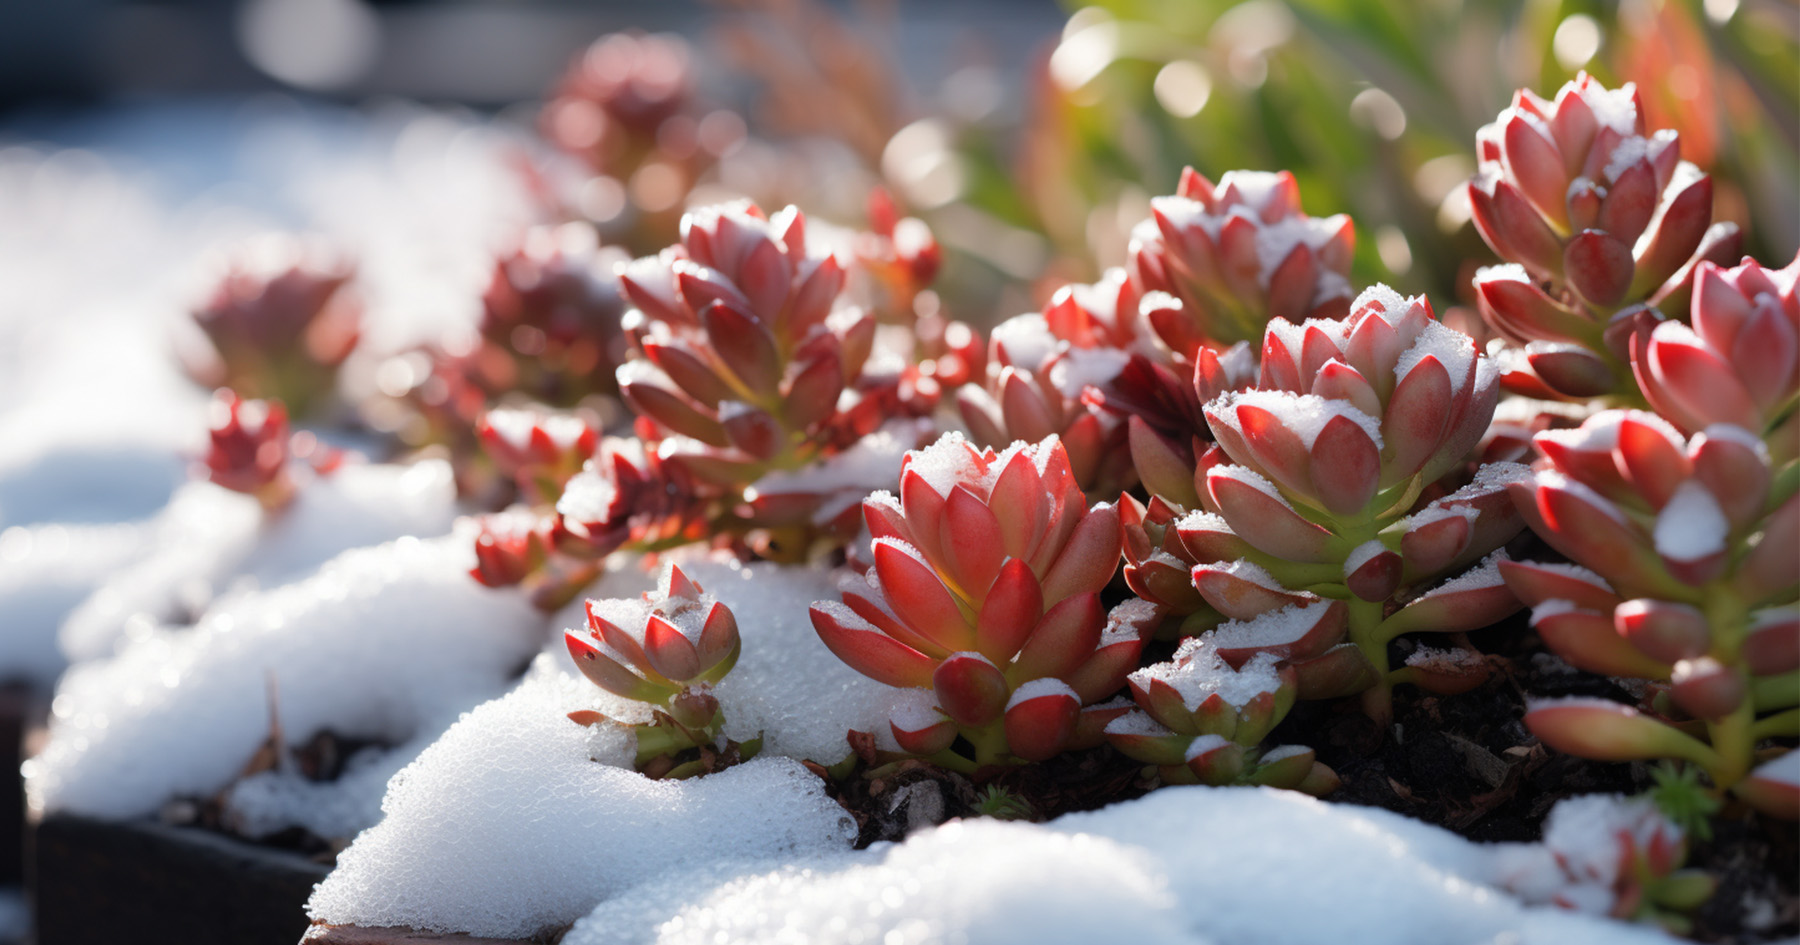 stonecrop succulents in the snow